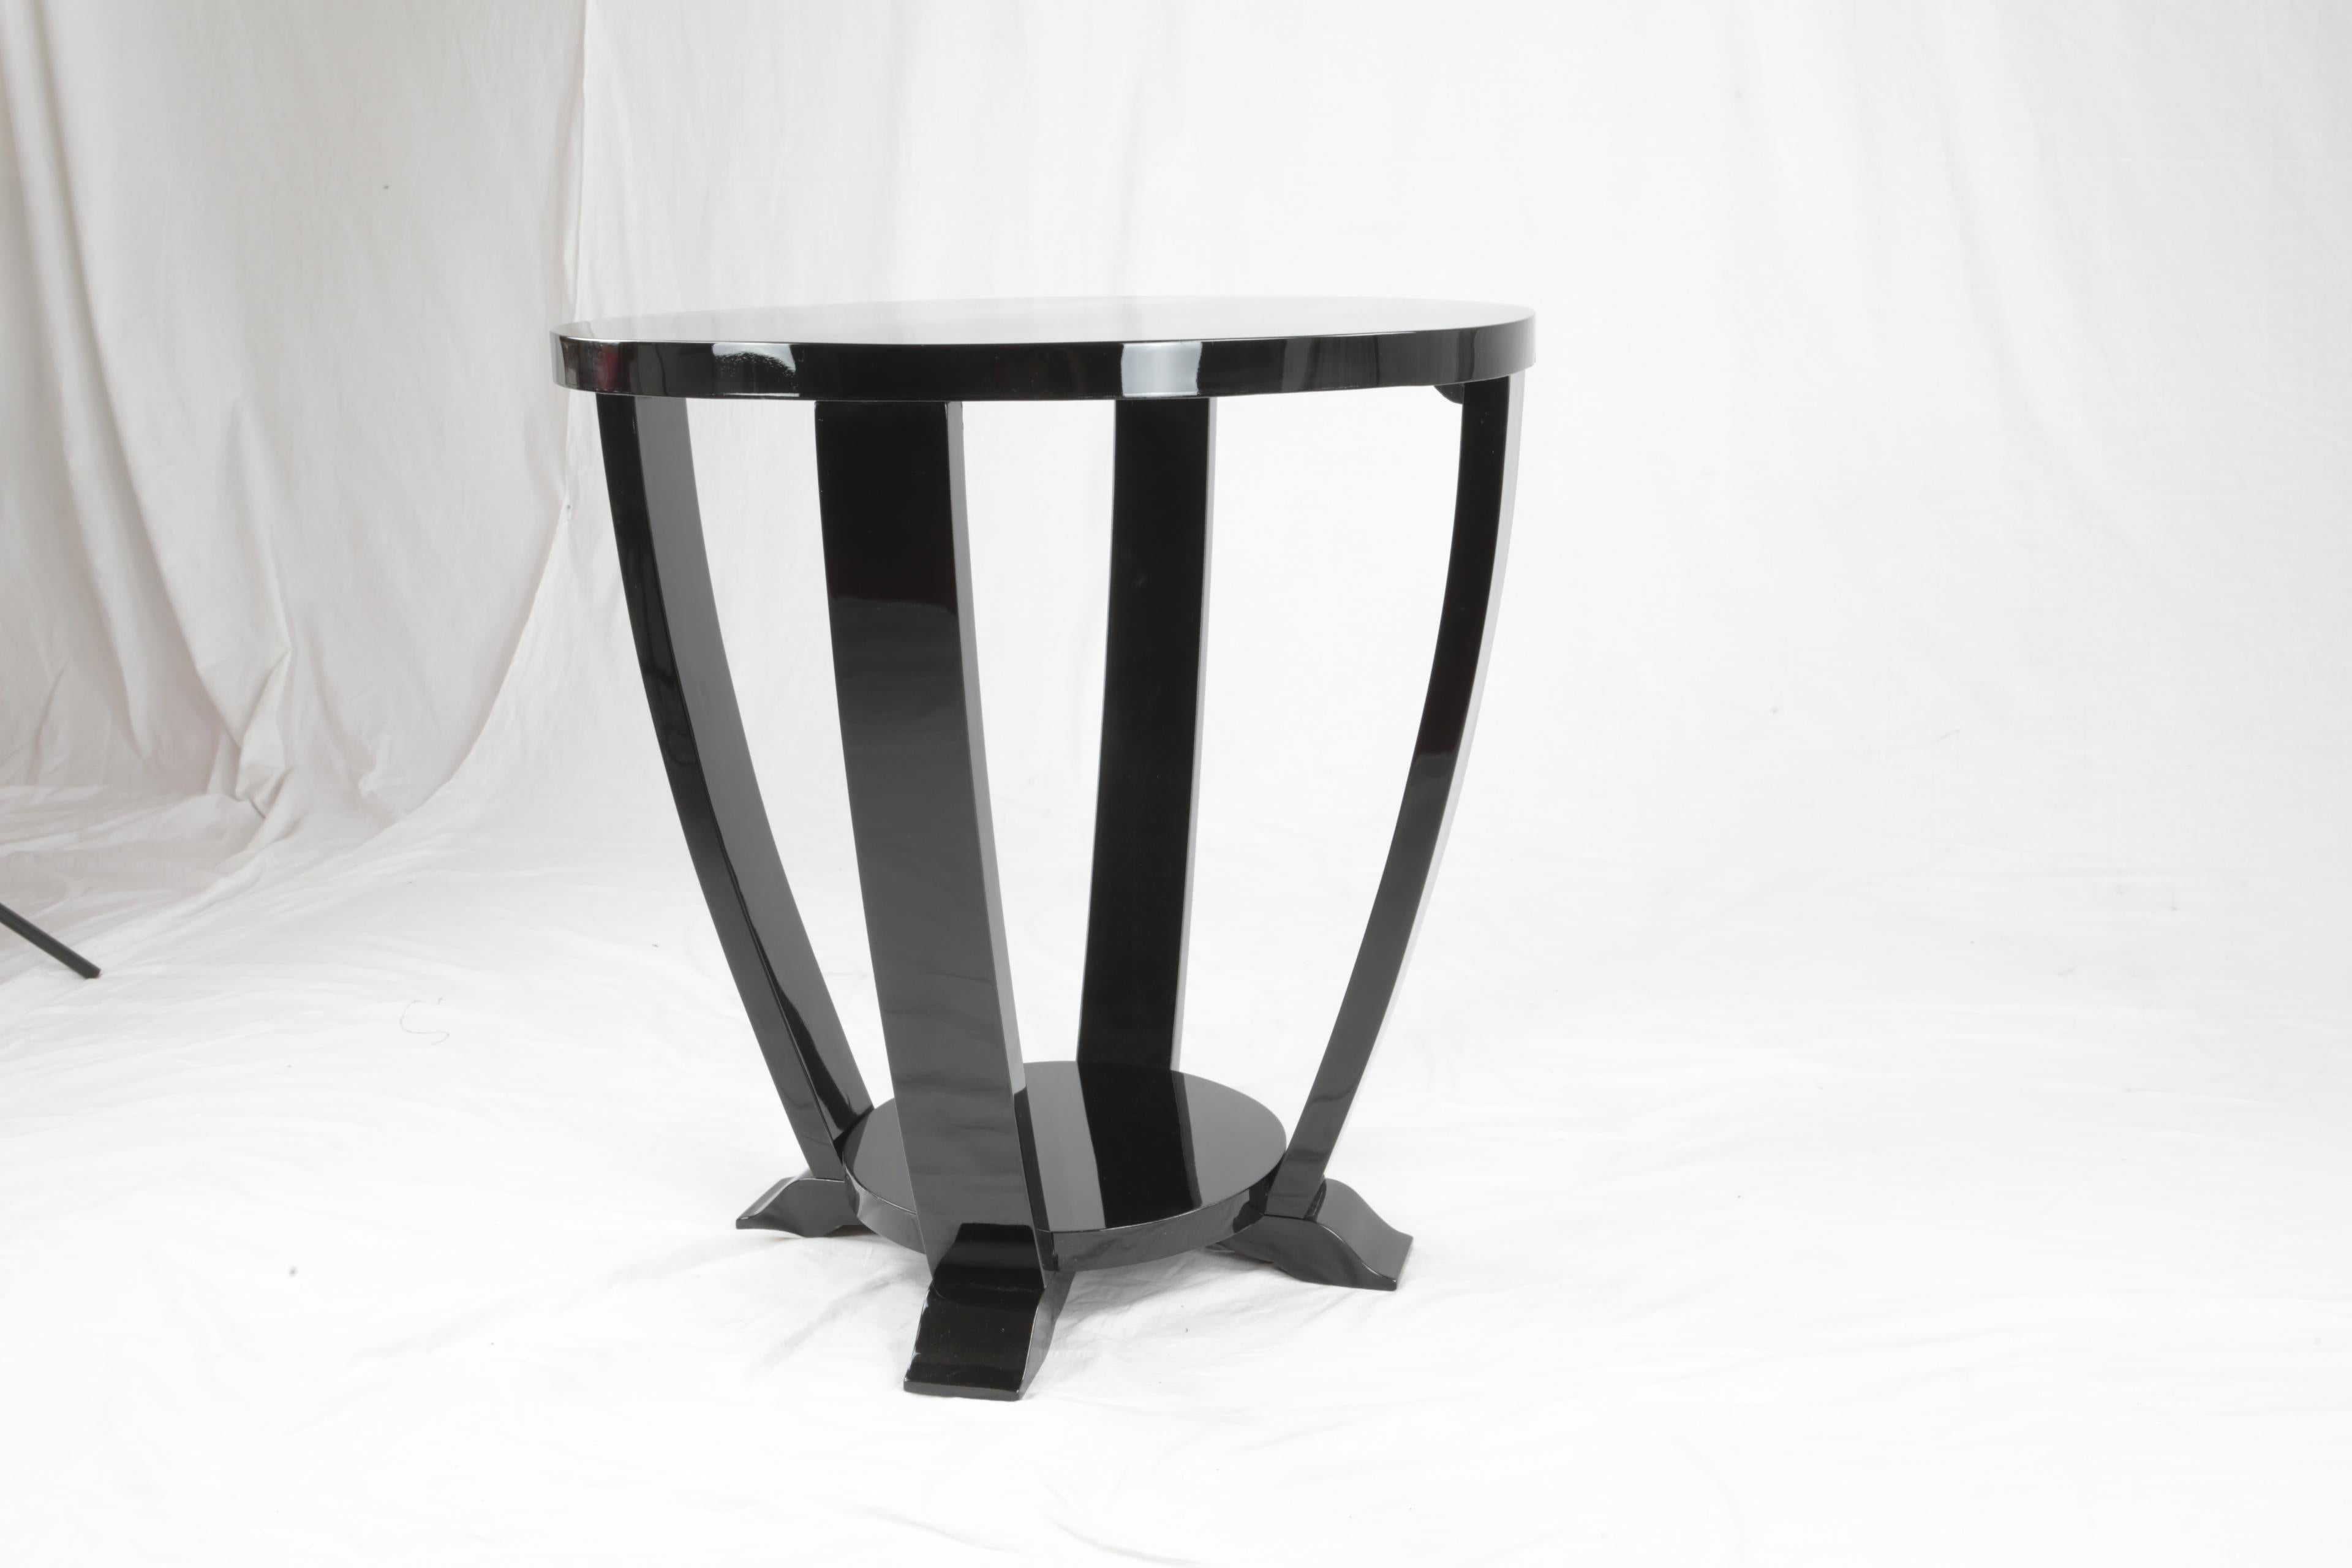 Polished French Art Deco Side Table, Black Lacquered Wood, circa 1930